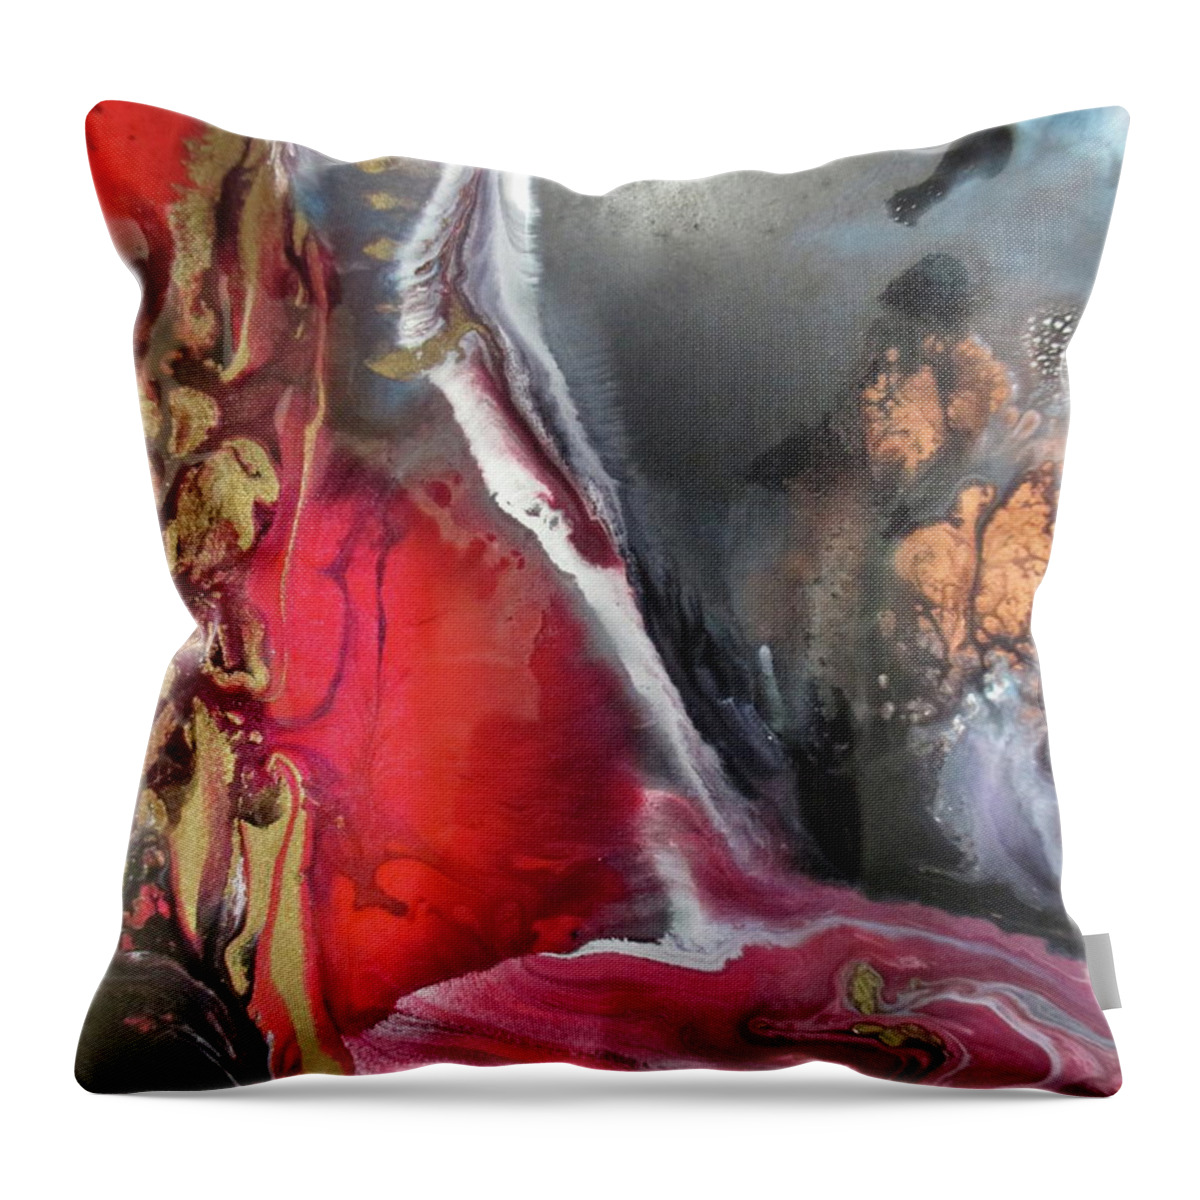 Melting Throw Pillow featuring the painting Melting Marble by Janice Nabors Raiteri